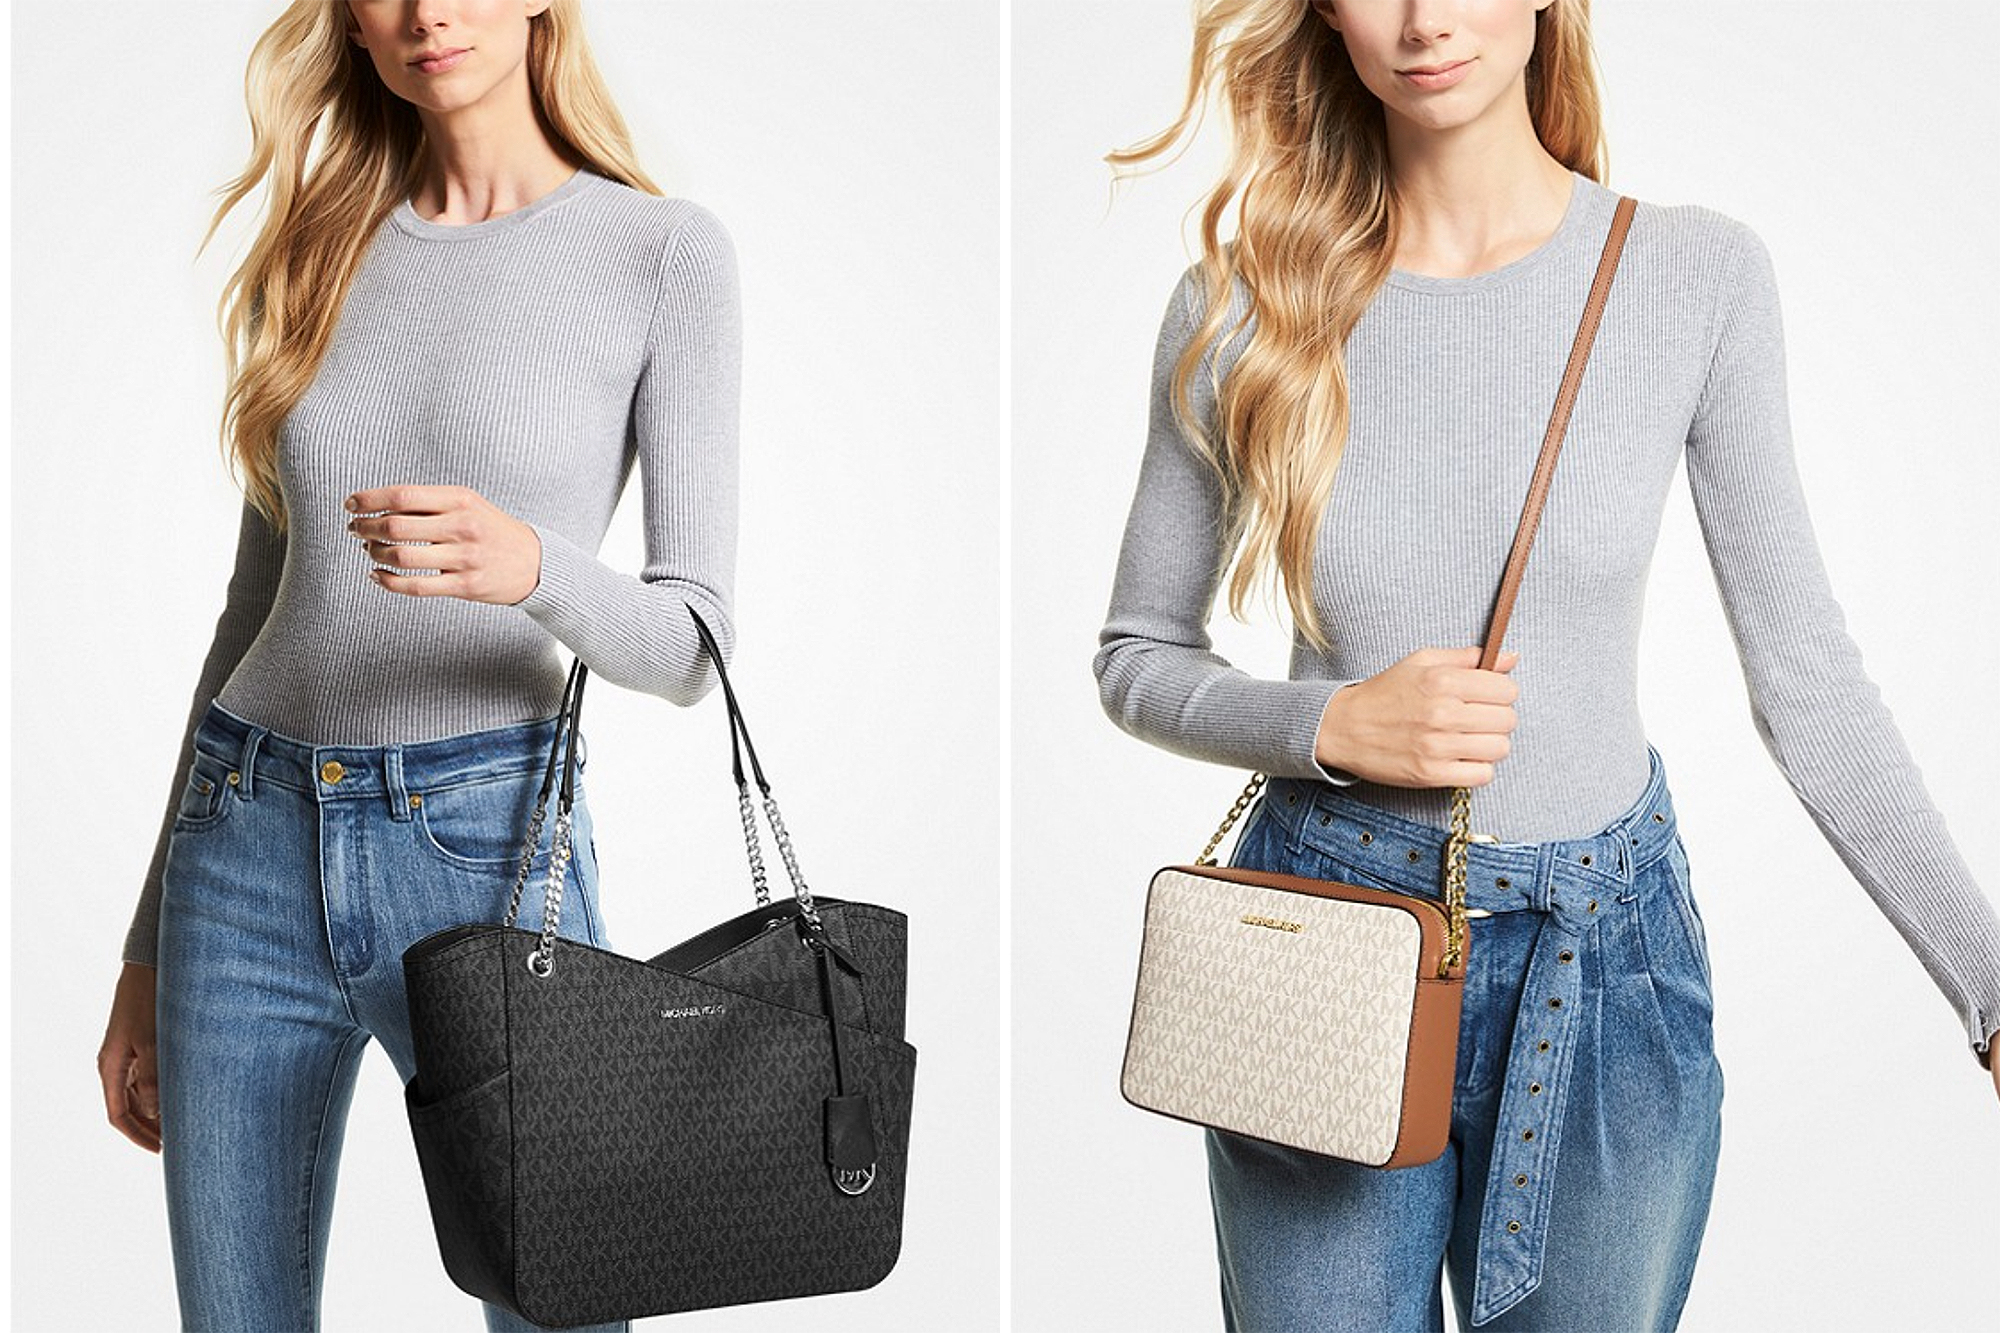 Kors Bestselling Bags Are Major — Up to 78% Off